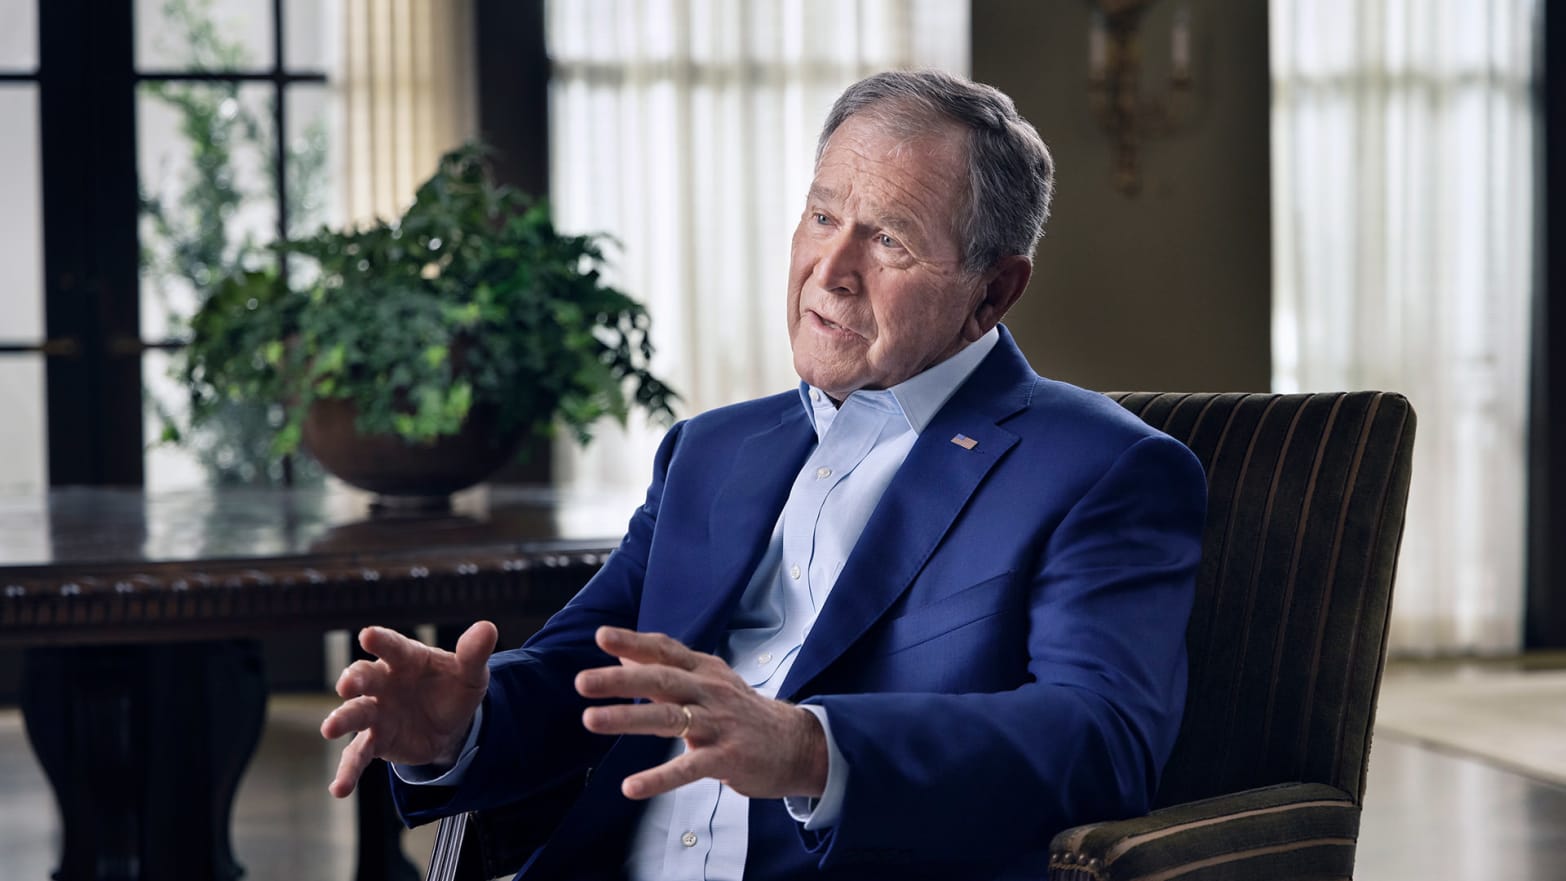 george-w-bush-masterclass-course-2022-former-president-discusses-9-11